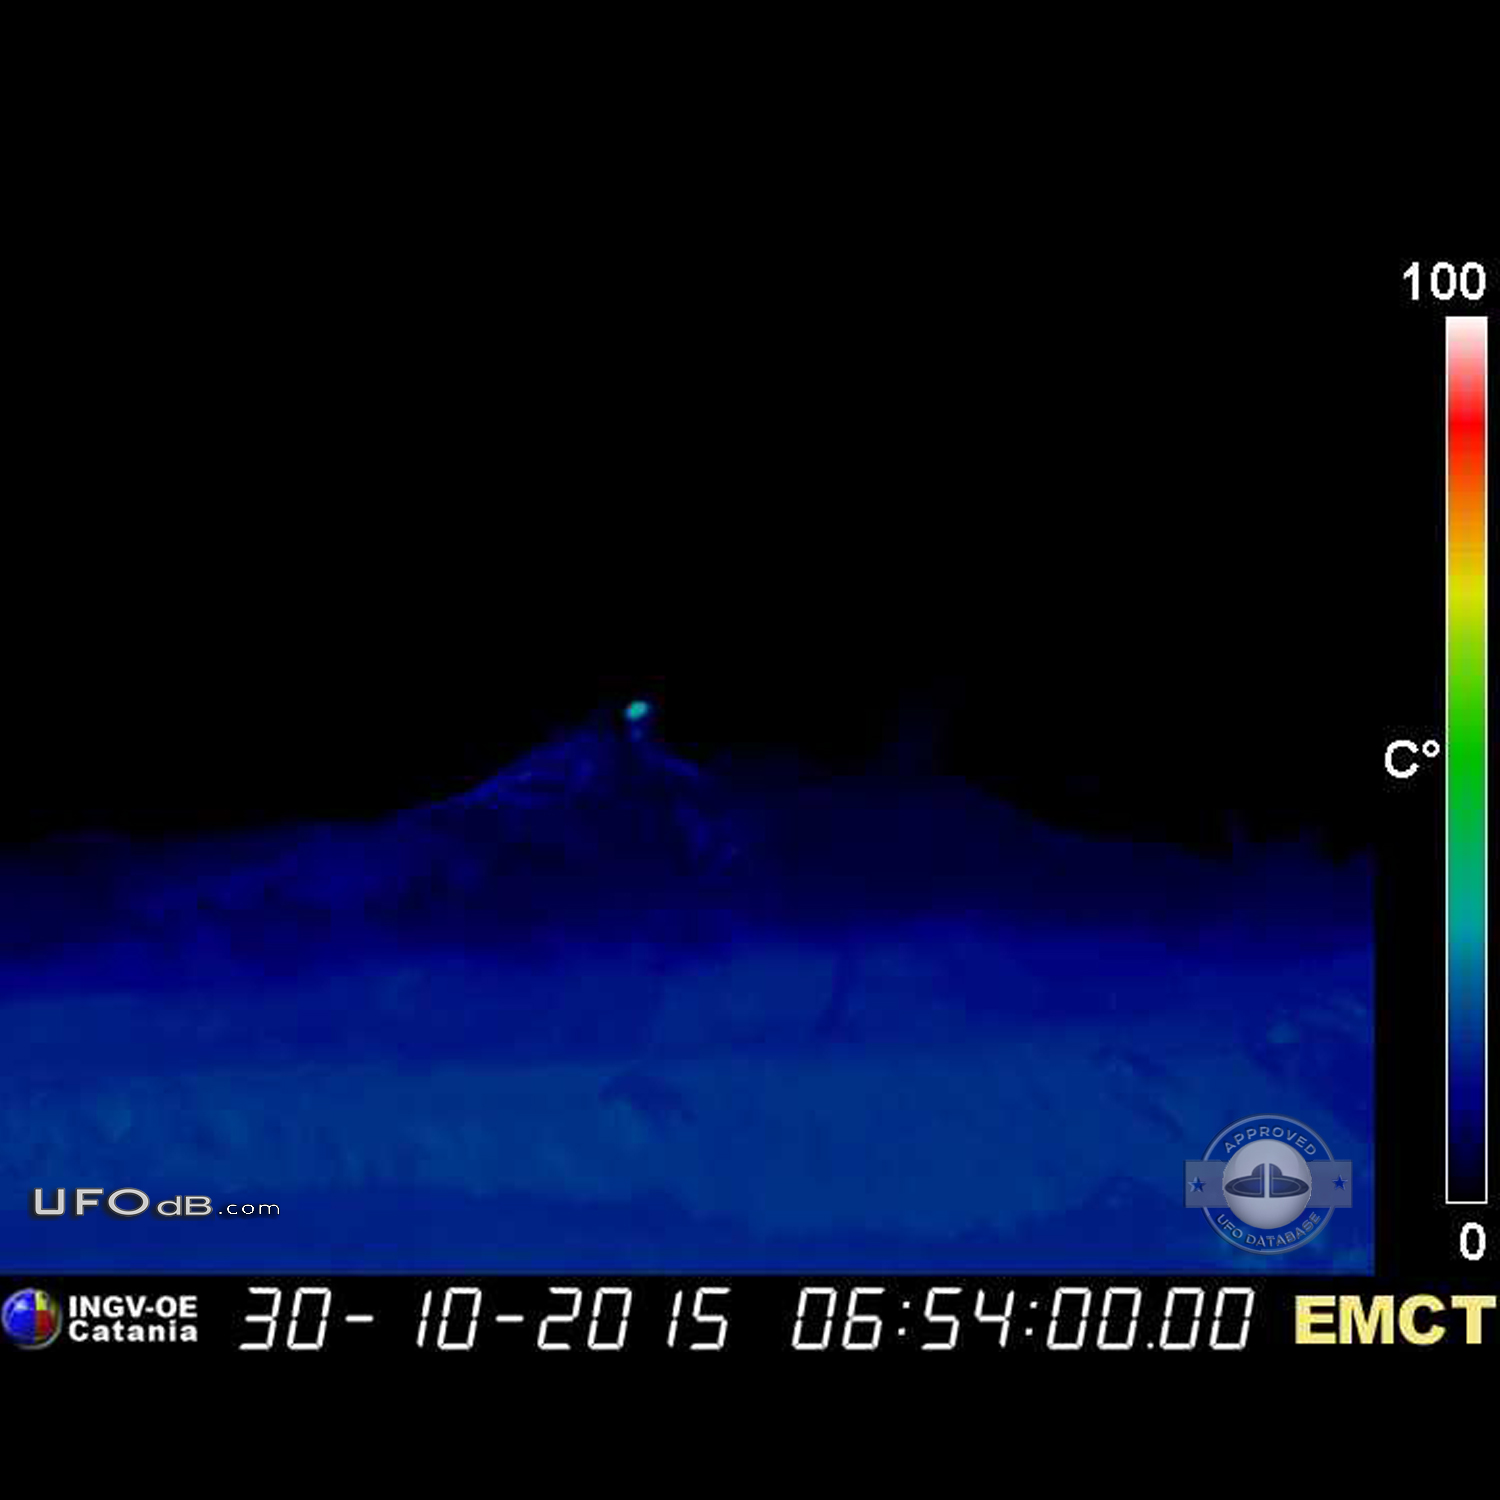 UFO seen over peak of Etna volcano in Sicily for some 15 minutes Catan UFO Picture #750-3